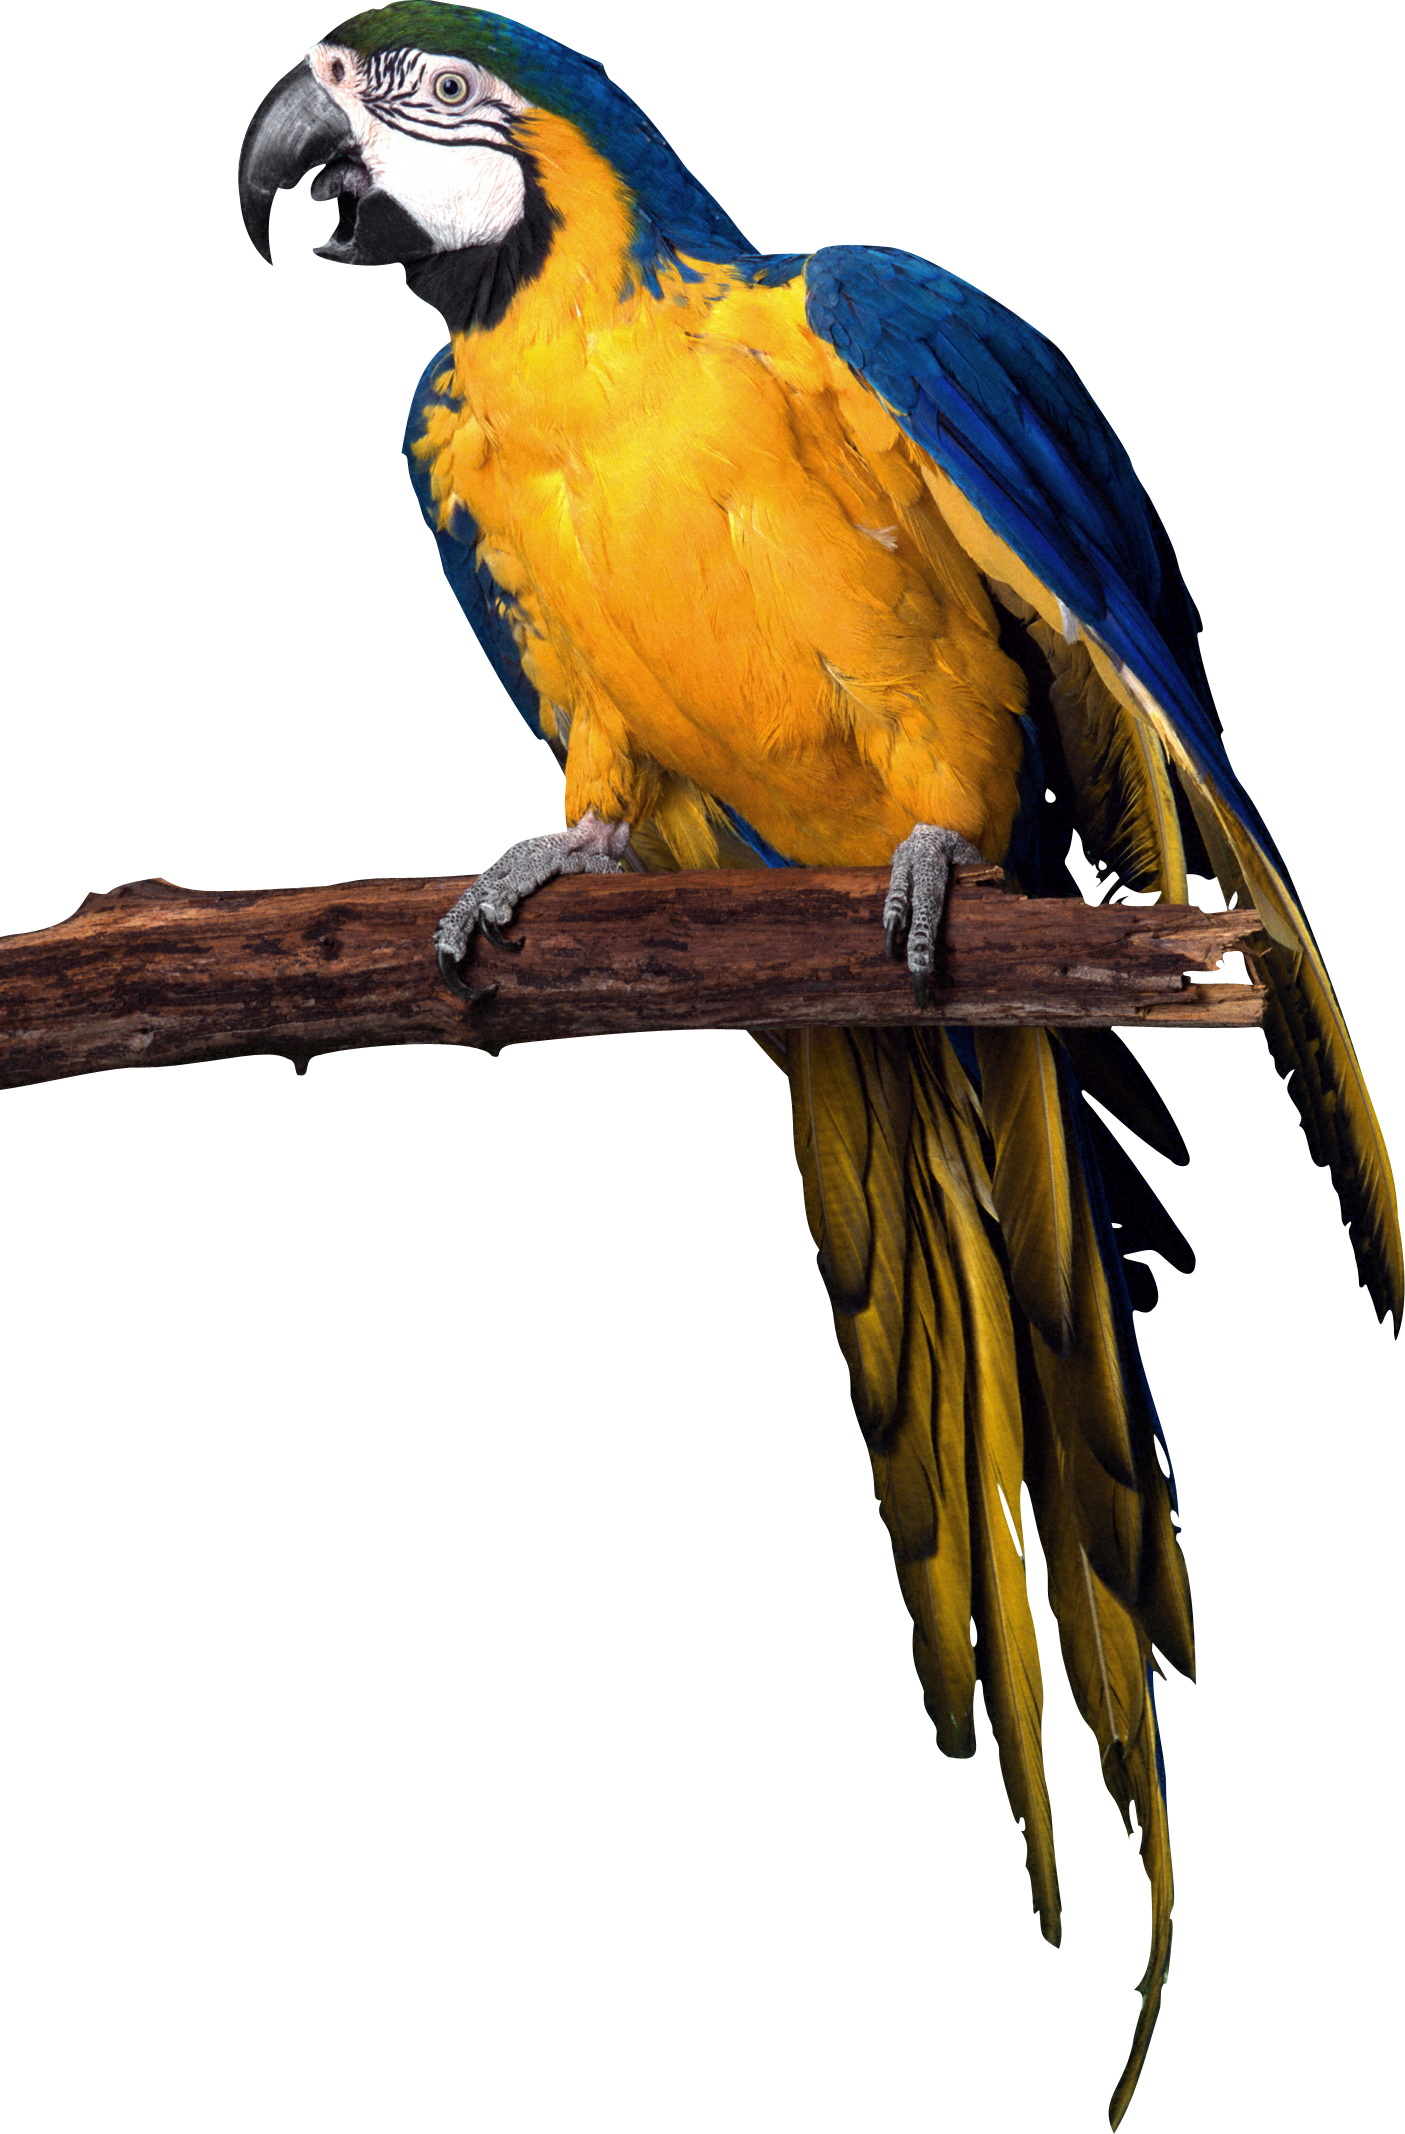 Parrot PNG images, free downl